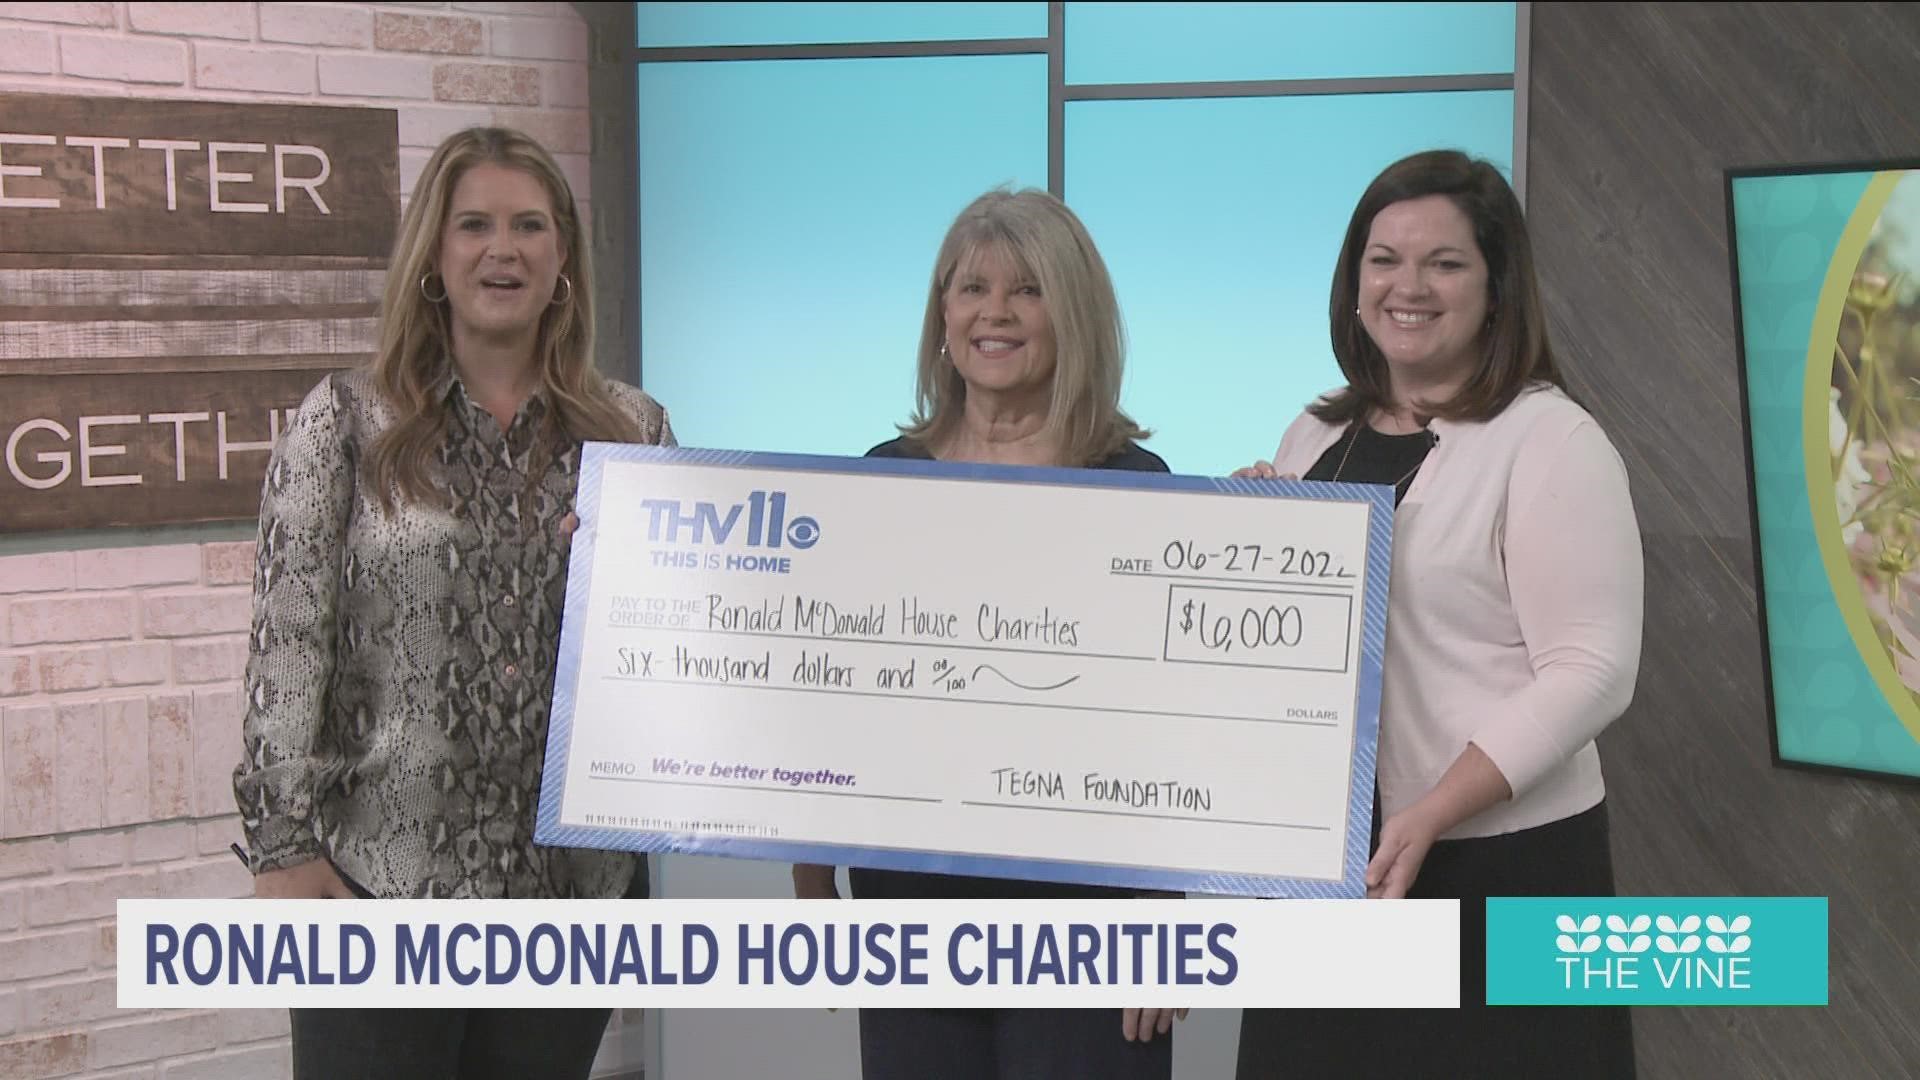 We've invited our friends with the Ronald McDonald  House Charities onto The Vine because THV11 and the TEGNA Foundation are rewarding them with a $6,000 grant.